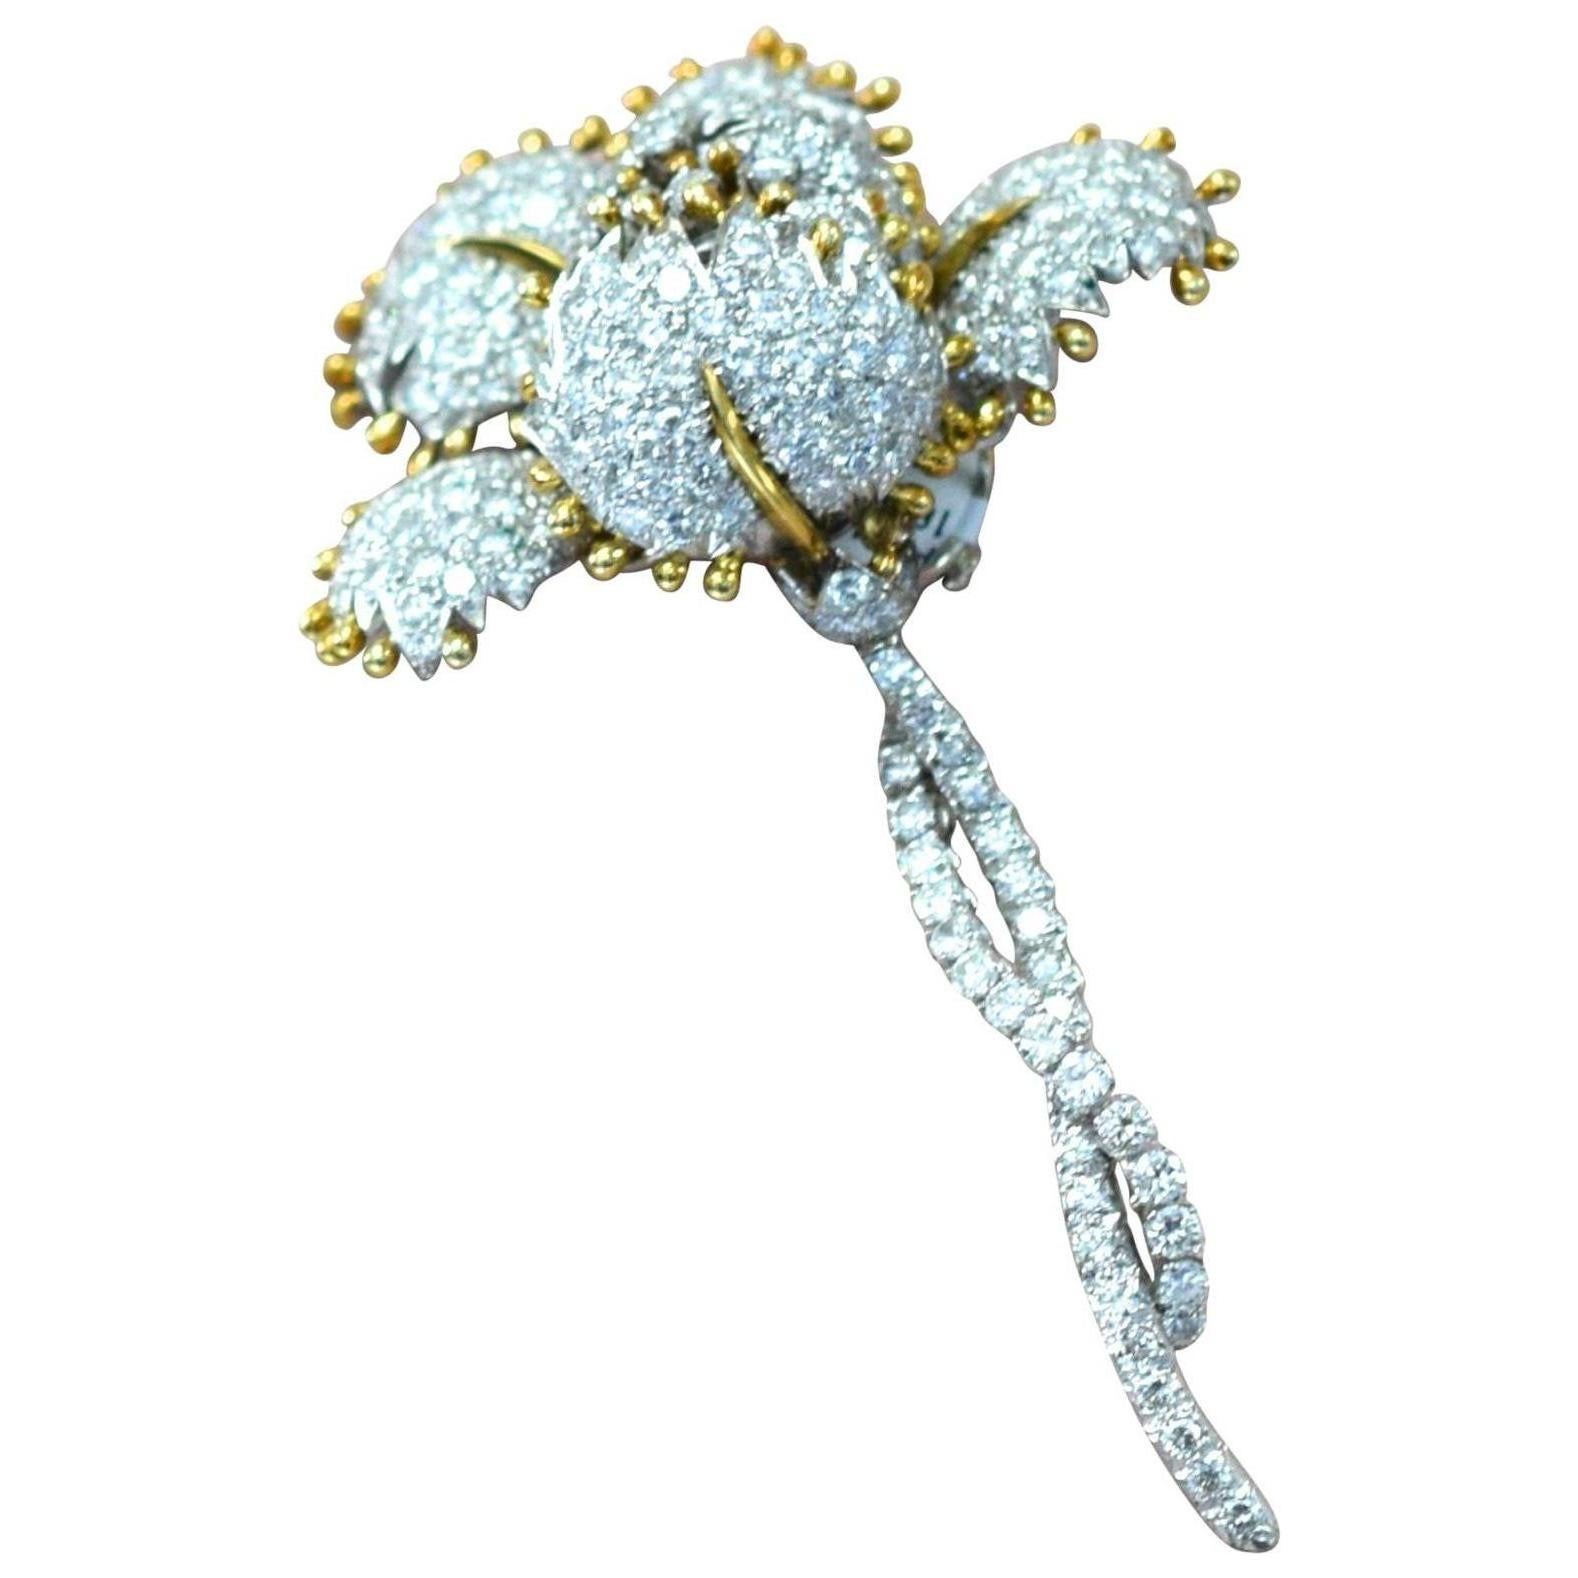 A diamond brooch, Van Cleef & Arpels of floral design, set throughout with round brilliant-cut diamonds, estimated total diamond weight is approximately 19-20 carats; mounted in platinum and 18k gold
 Length: 3 1/2in. 
Signed VCA & numbered